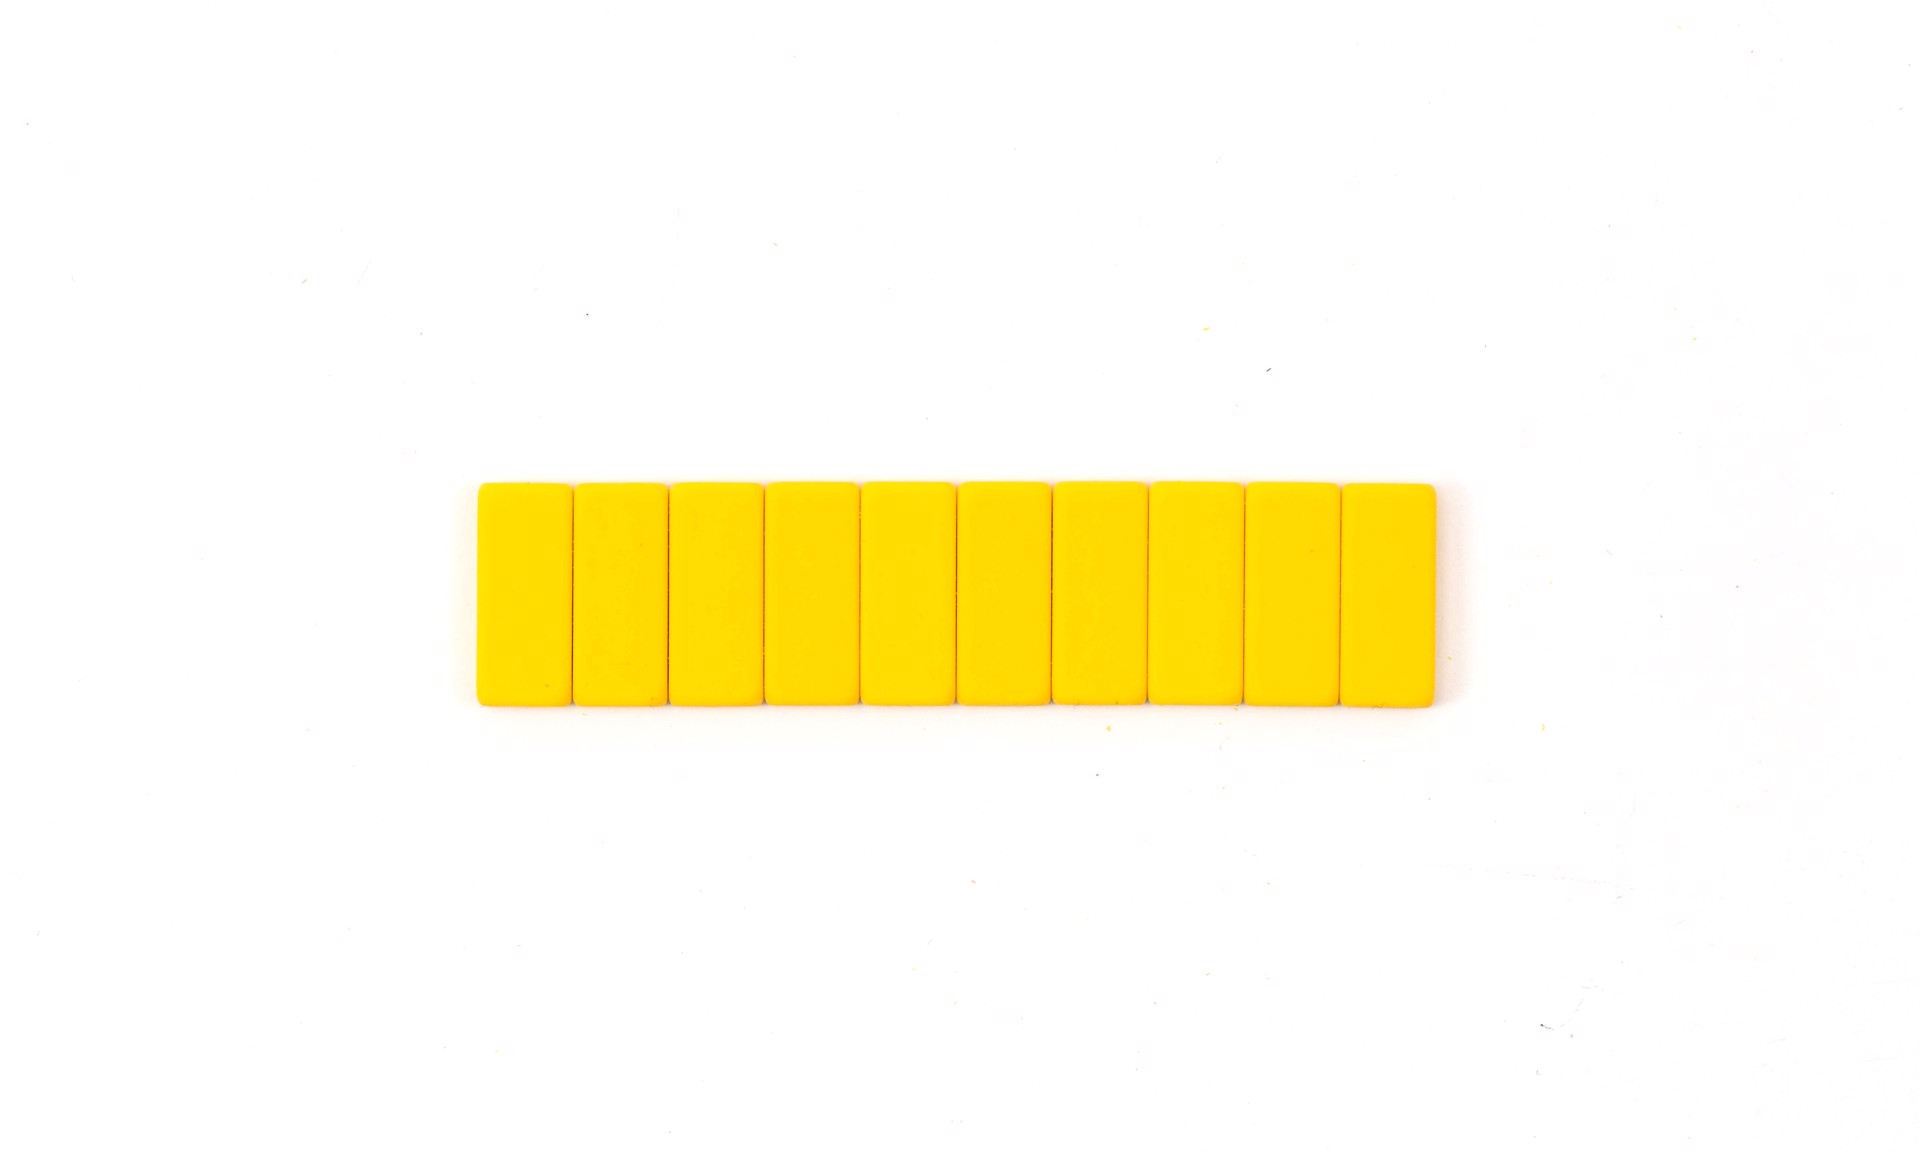 Yellow Replacement Erasers by Blackwing